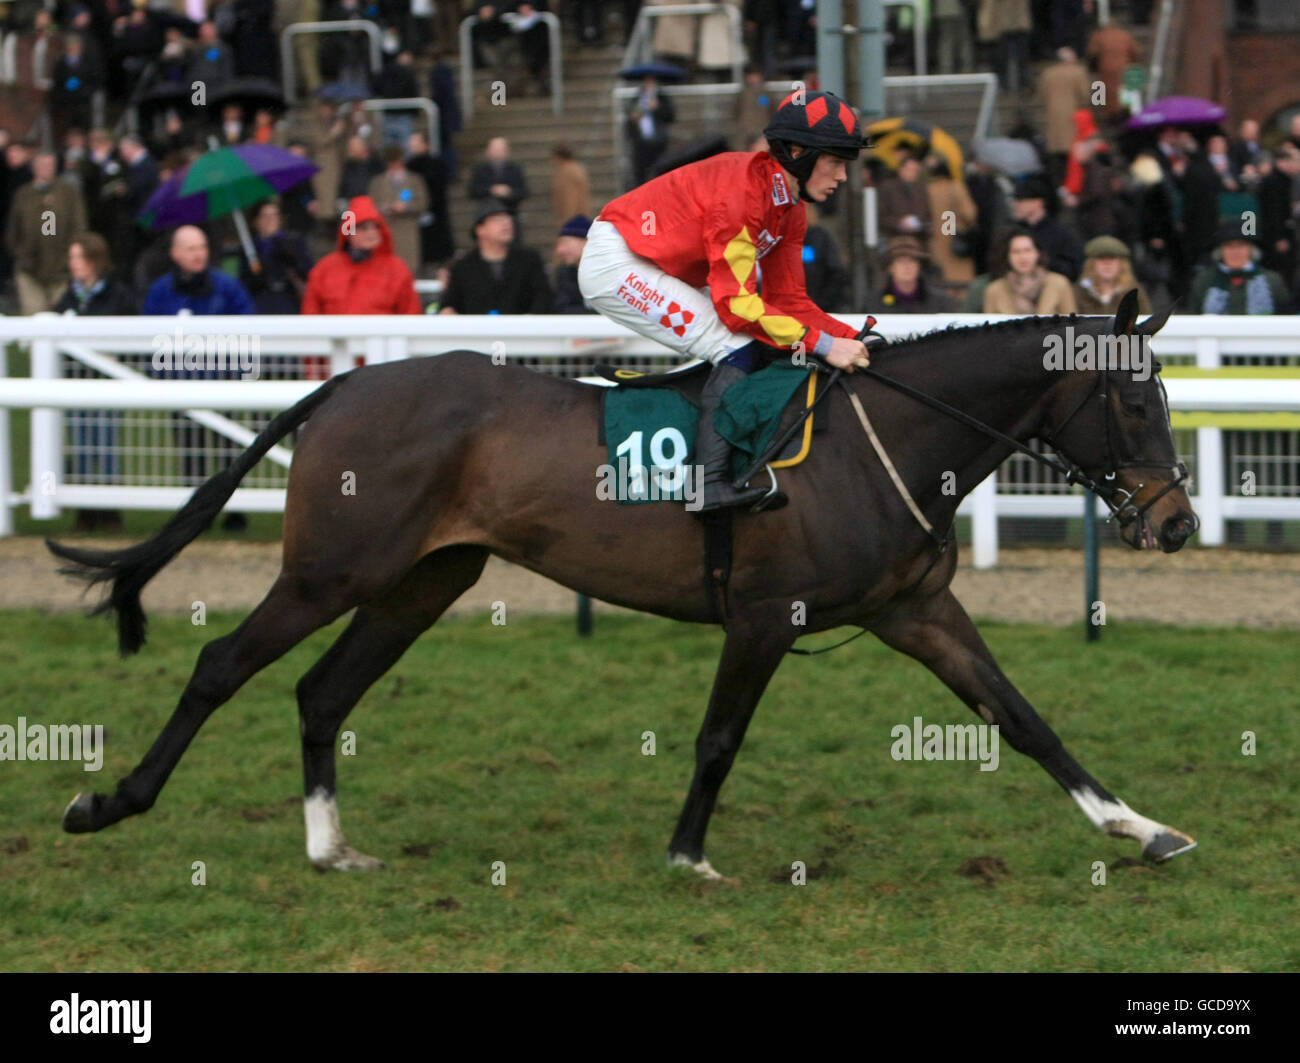 Horse Racing - 2010 Cheltenham Festival - Day Four. Nikola rdden by Mr Sam Twiston-Davies going to post for the Johnny Henderson Grand Annual Chase Challenge Cup Handicap Stock Photo